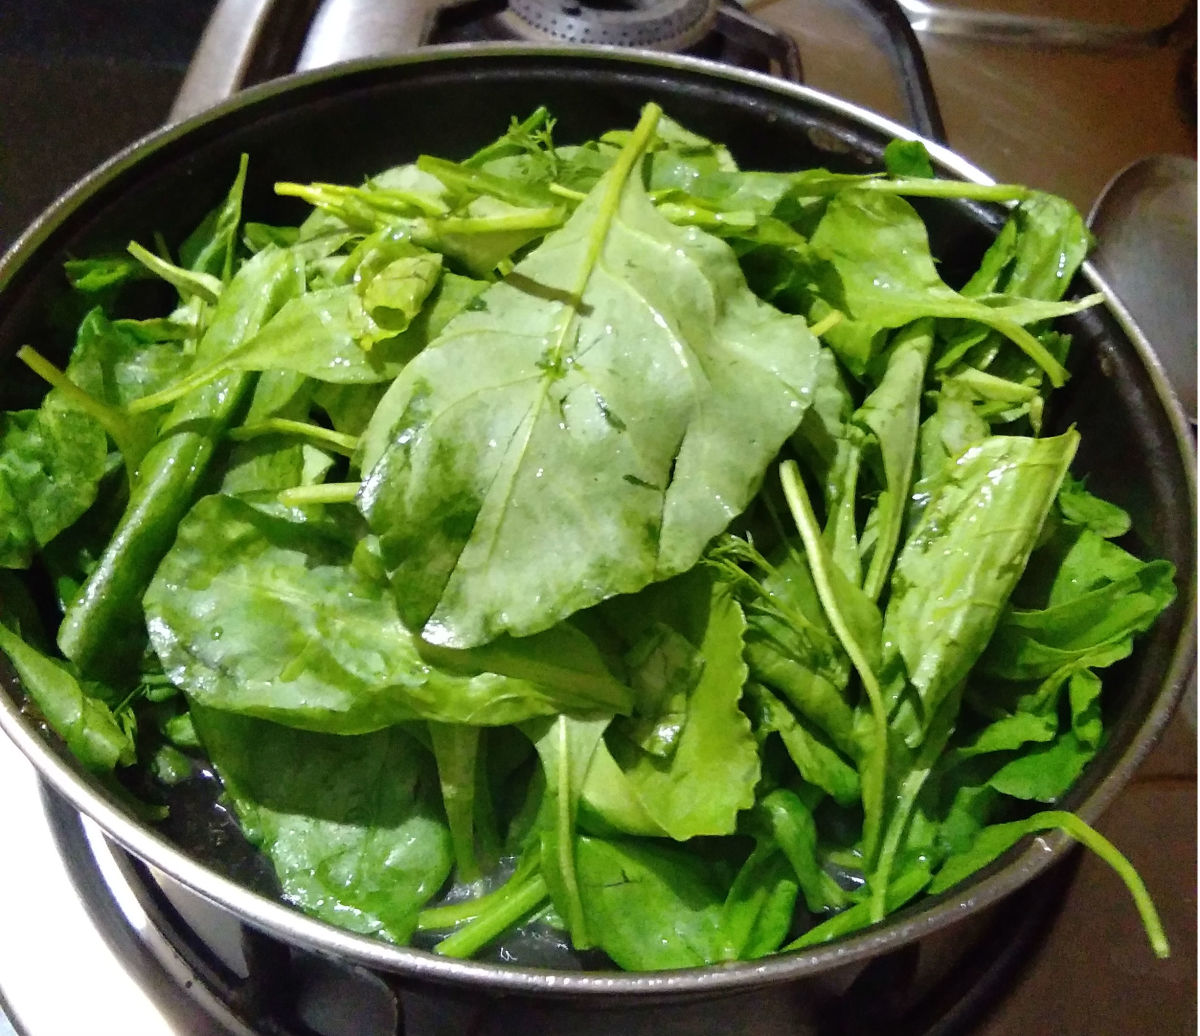 Step three: Stir-cook the remaining spinach in the same pan.